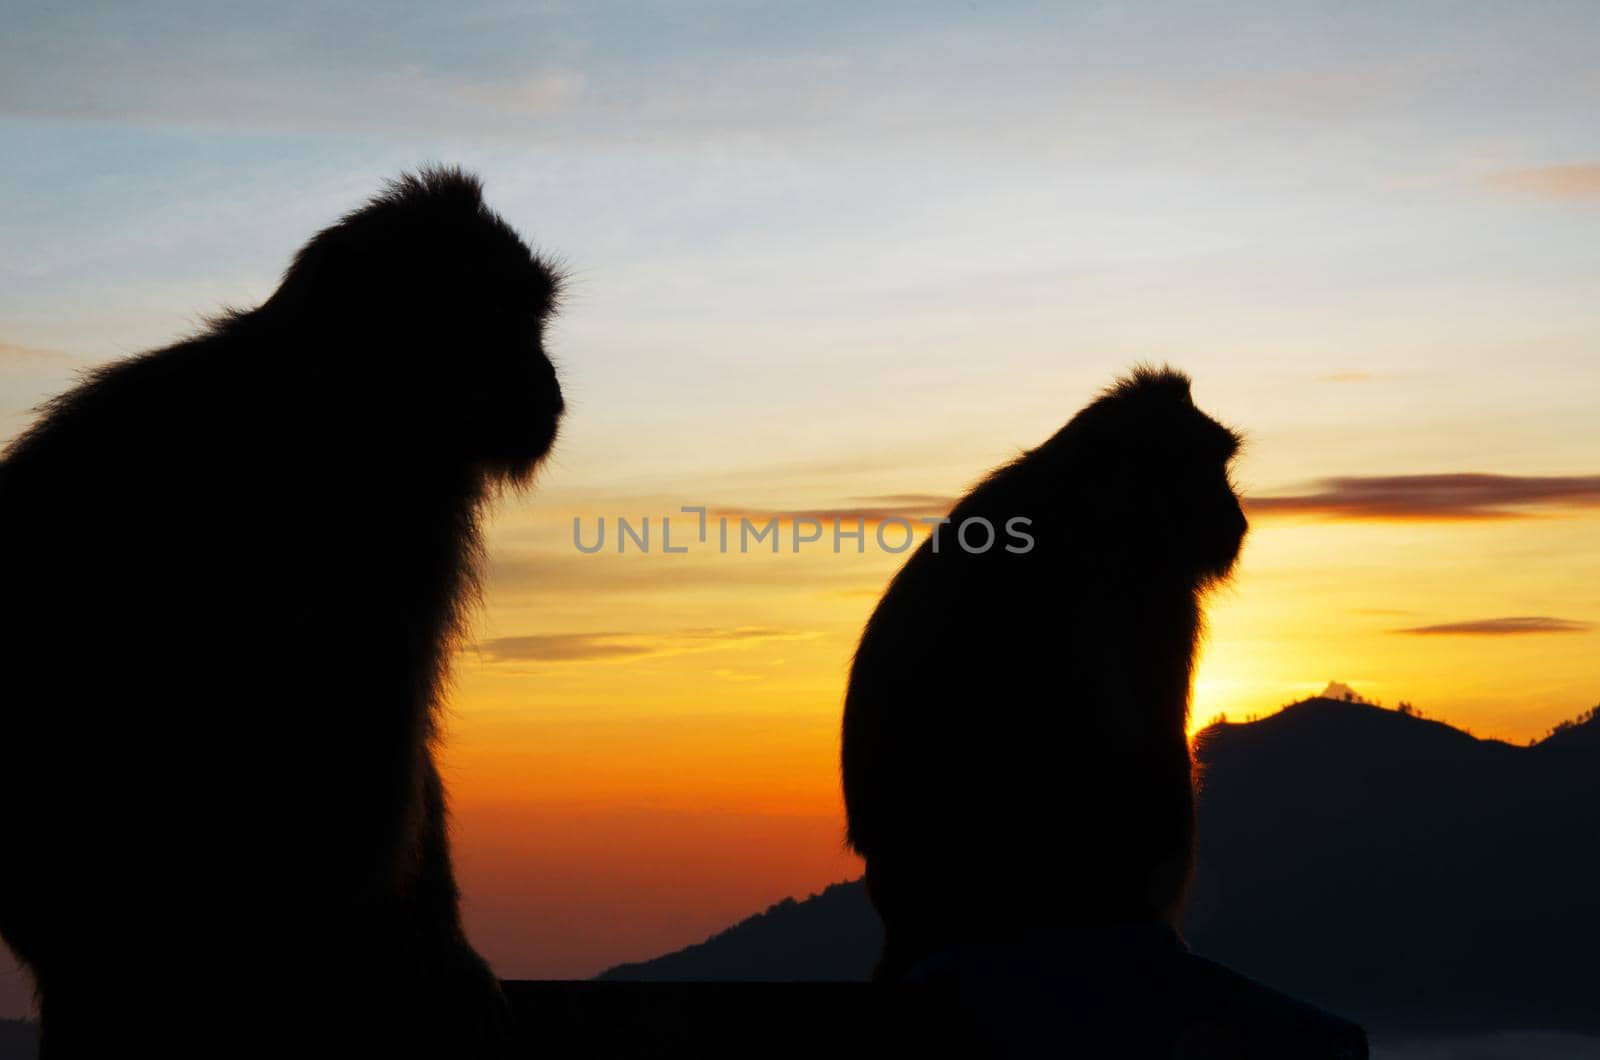 Silhouette of a monkey in the mountains at dawn. The symbol of the new year 2016. Fire monkeys. stock image.